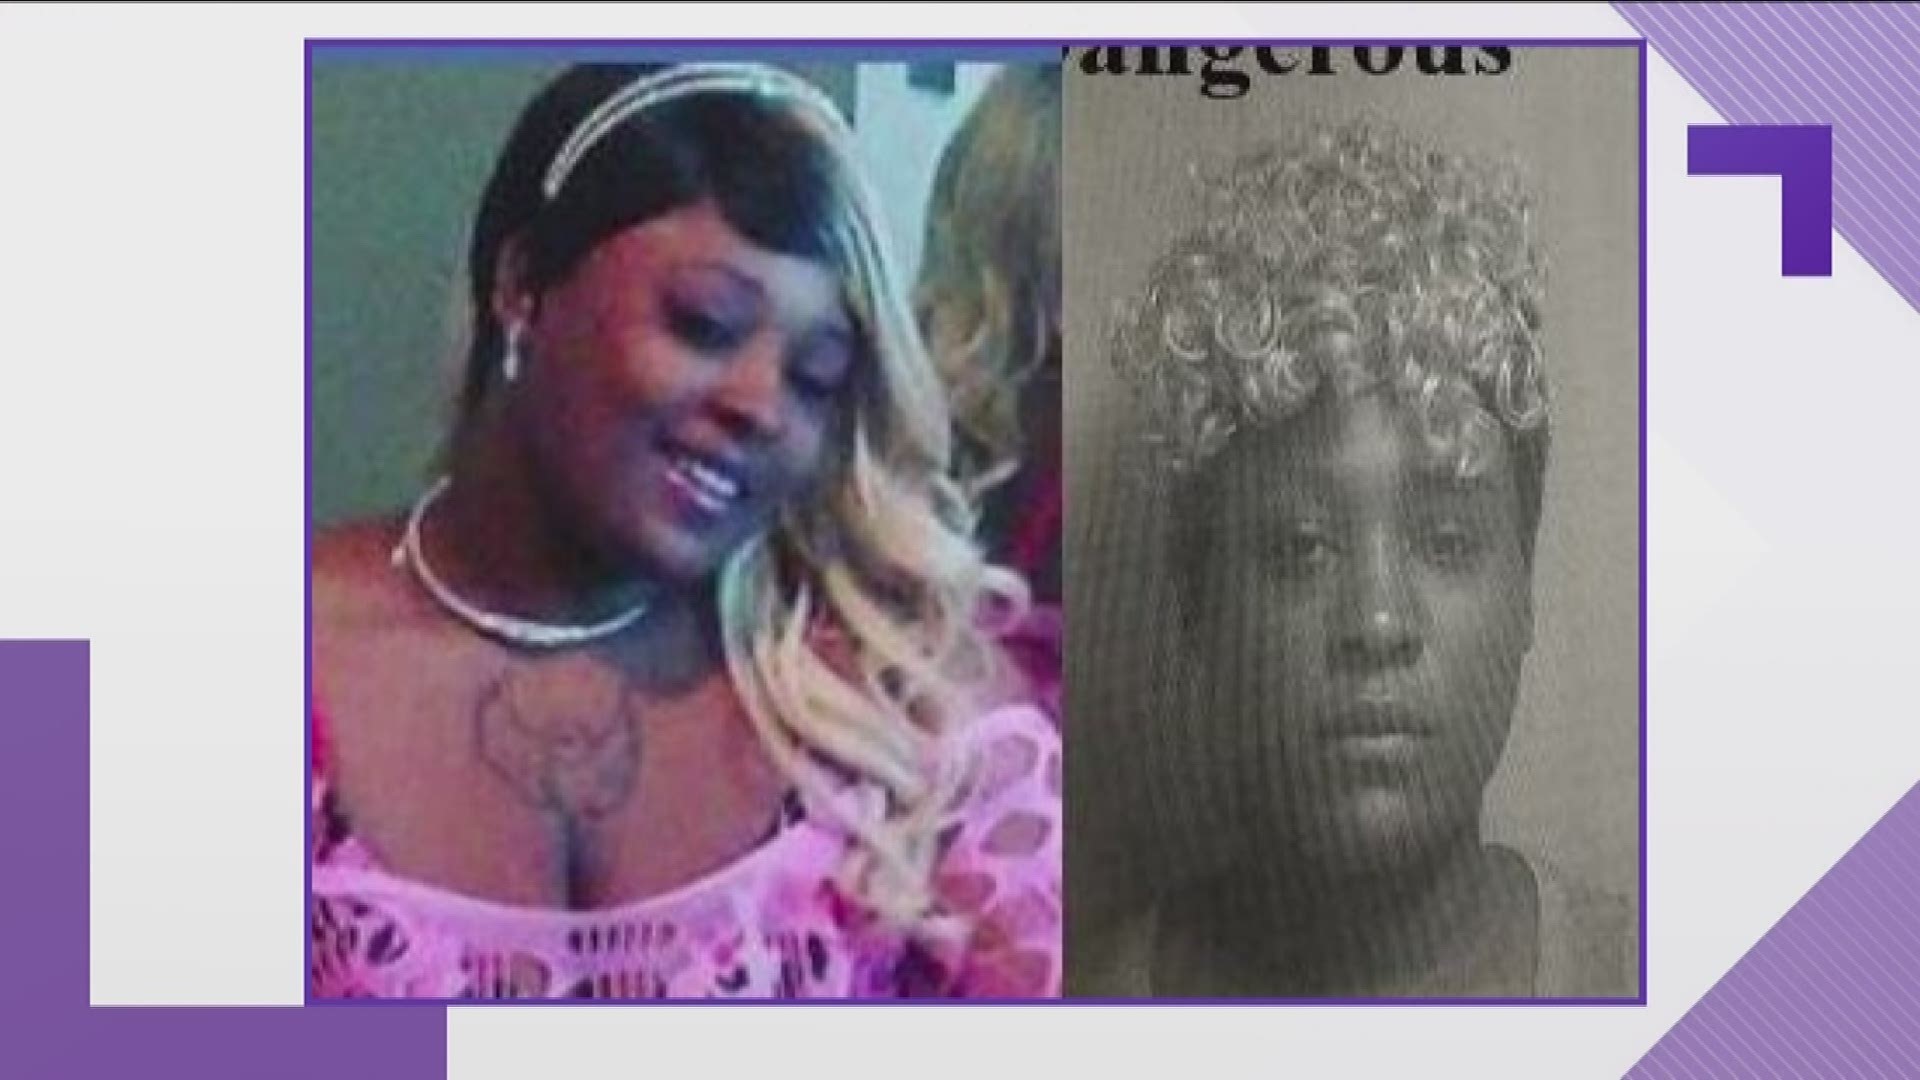 Lashandra Boyd, also known as Starr Redd, was already the prime suspect in a violent home invasion, and is now wanted for murder as well.